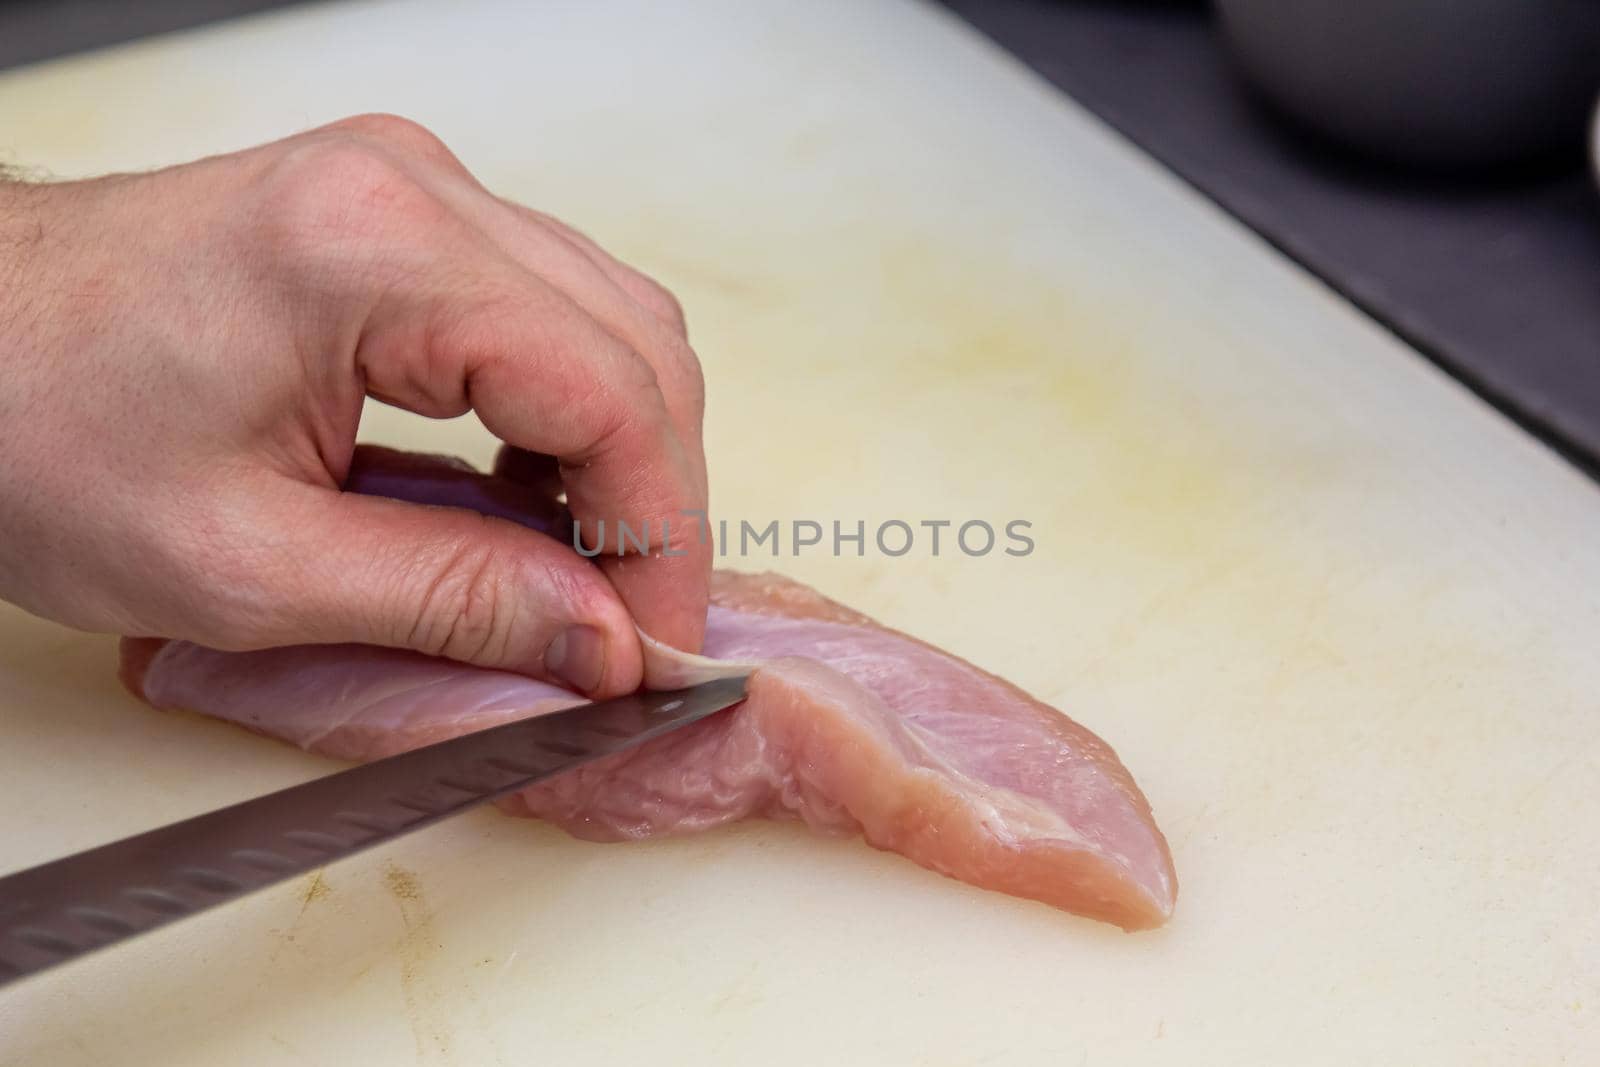 The cook cuts a chicken breast with a knife on a white board by Milanchikov